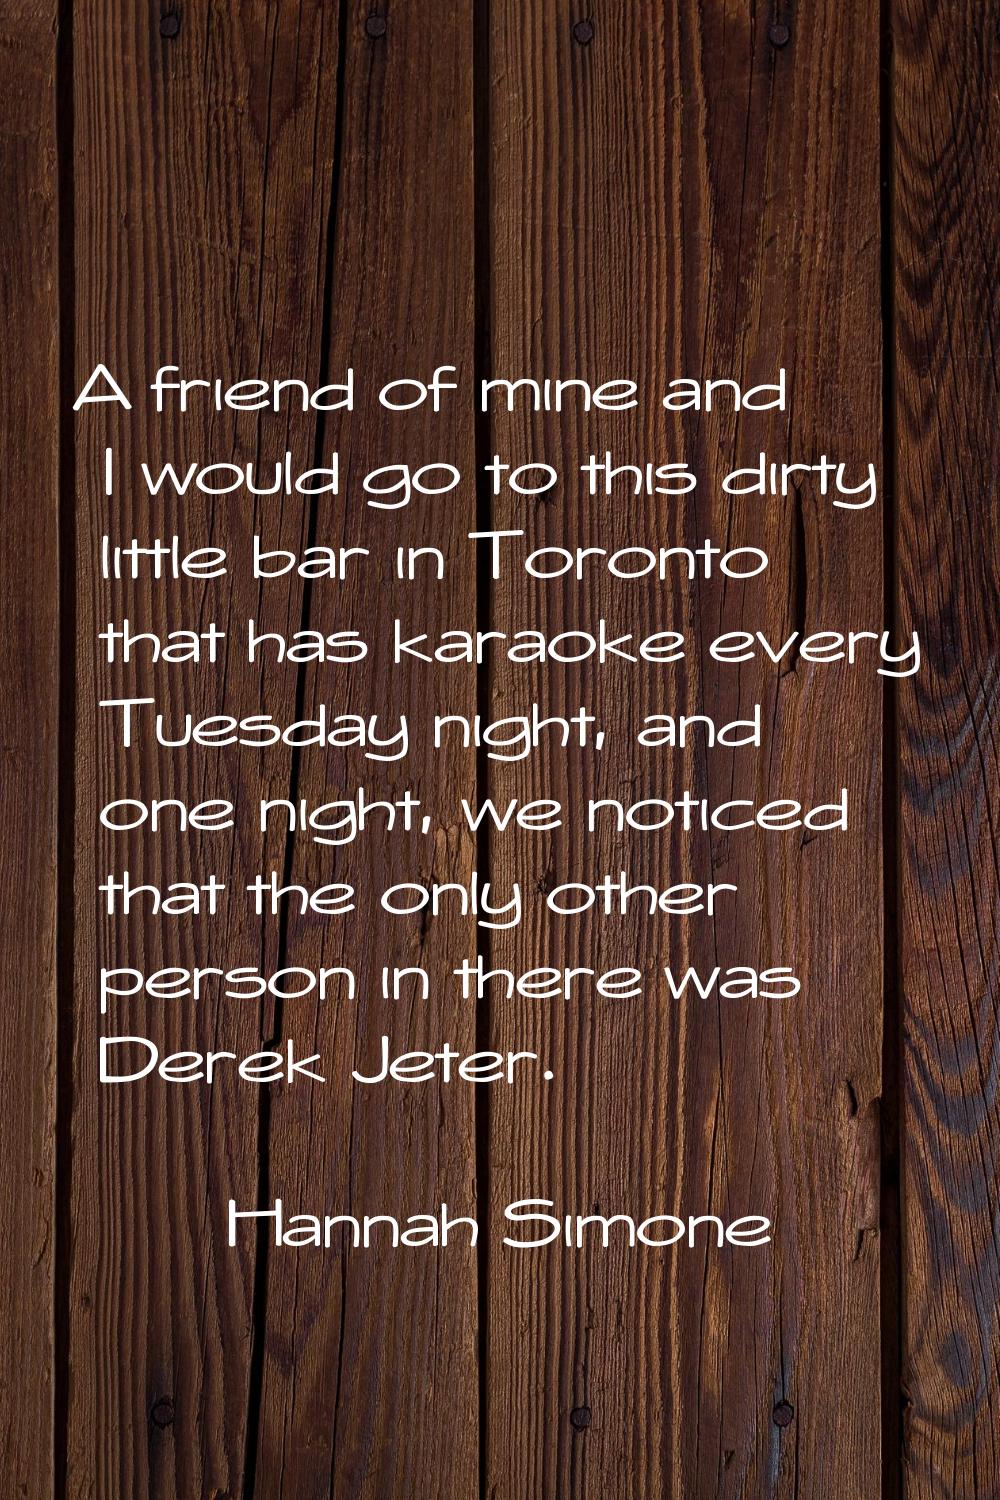 A friend of mine and I would go to this dirty little bar in Toronto that has karaoke every Tuesday 